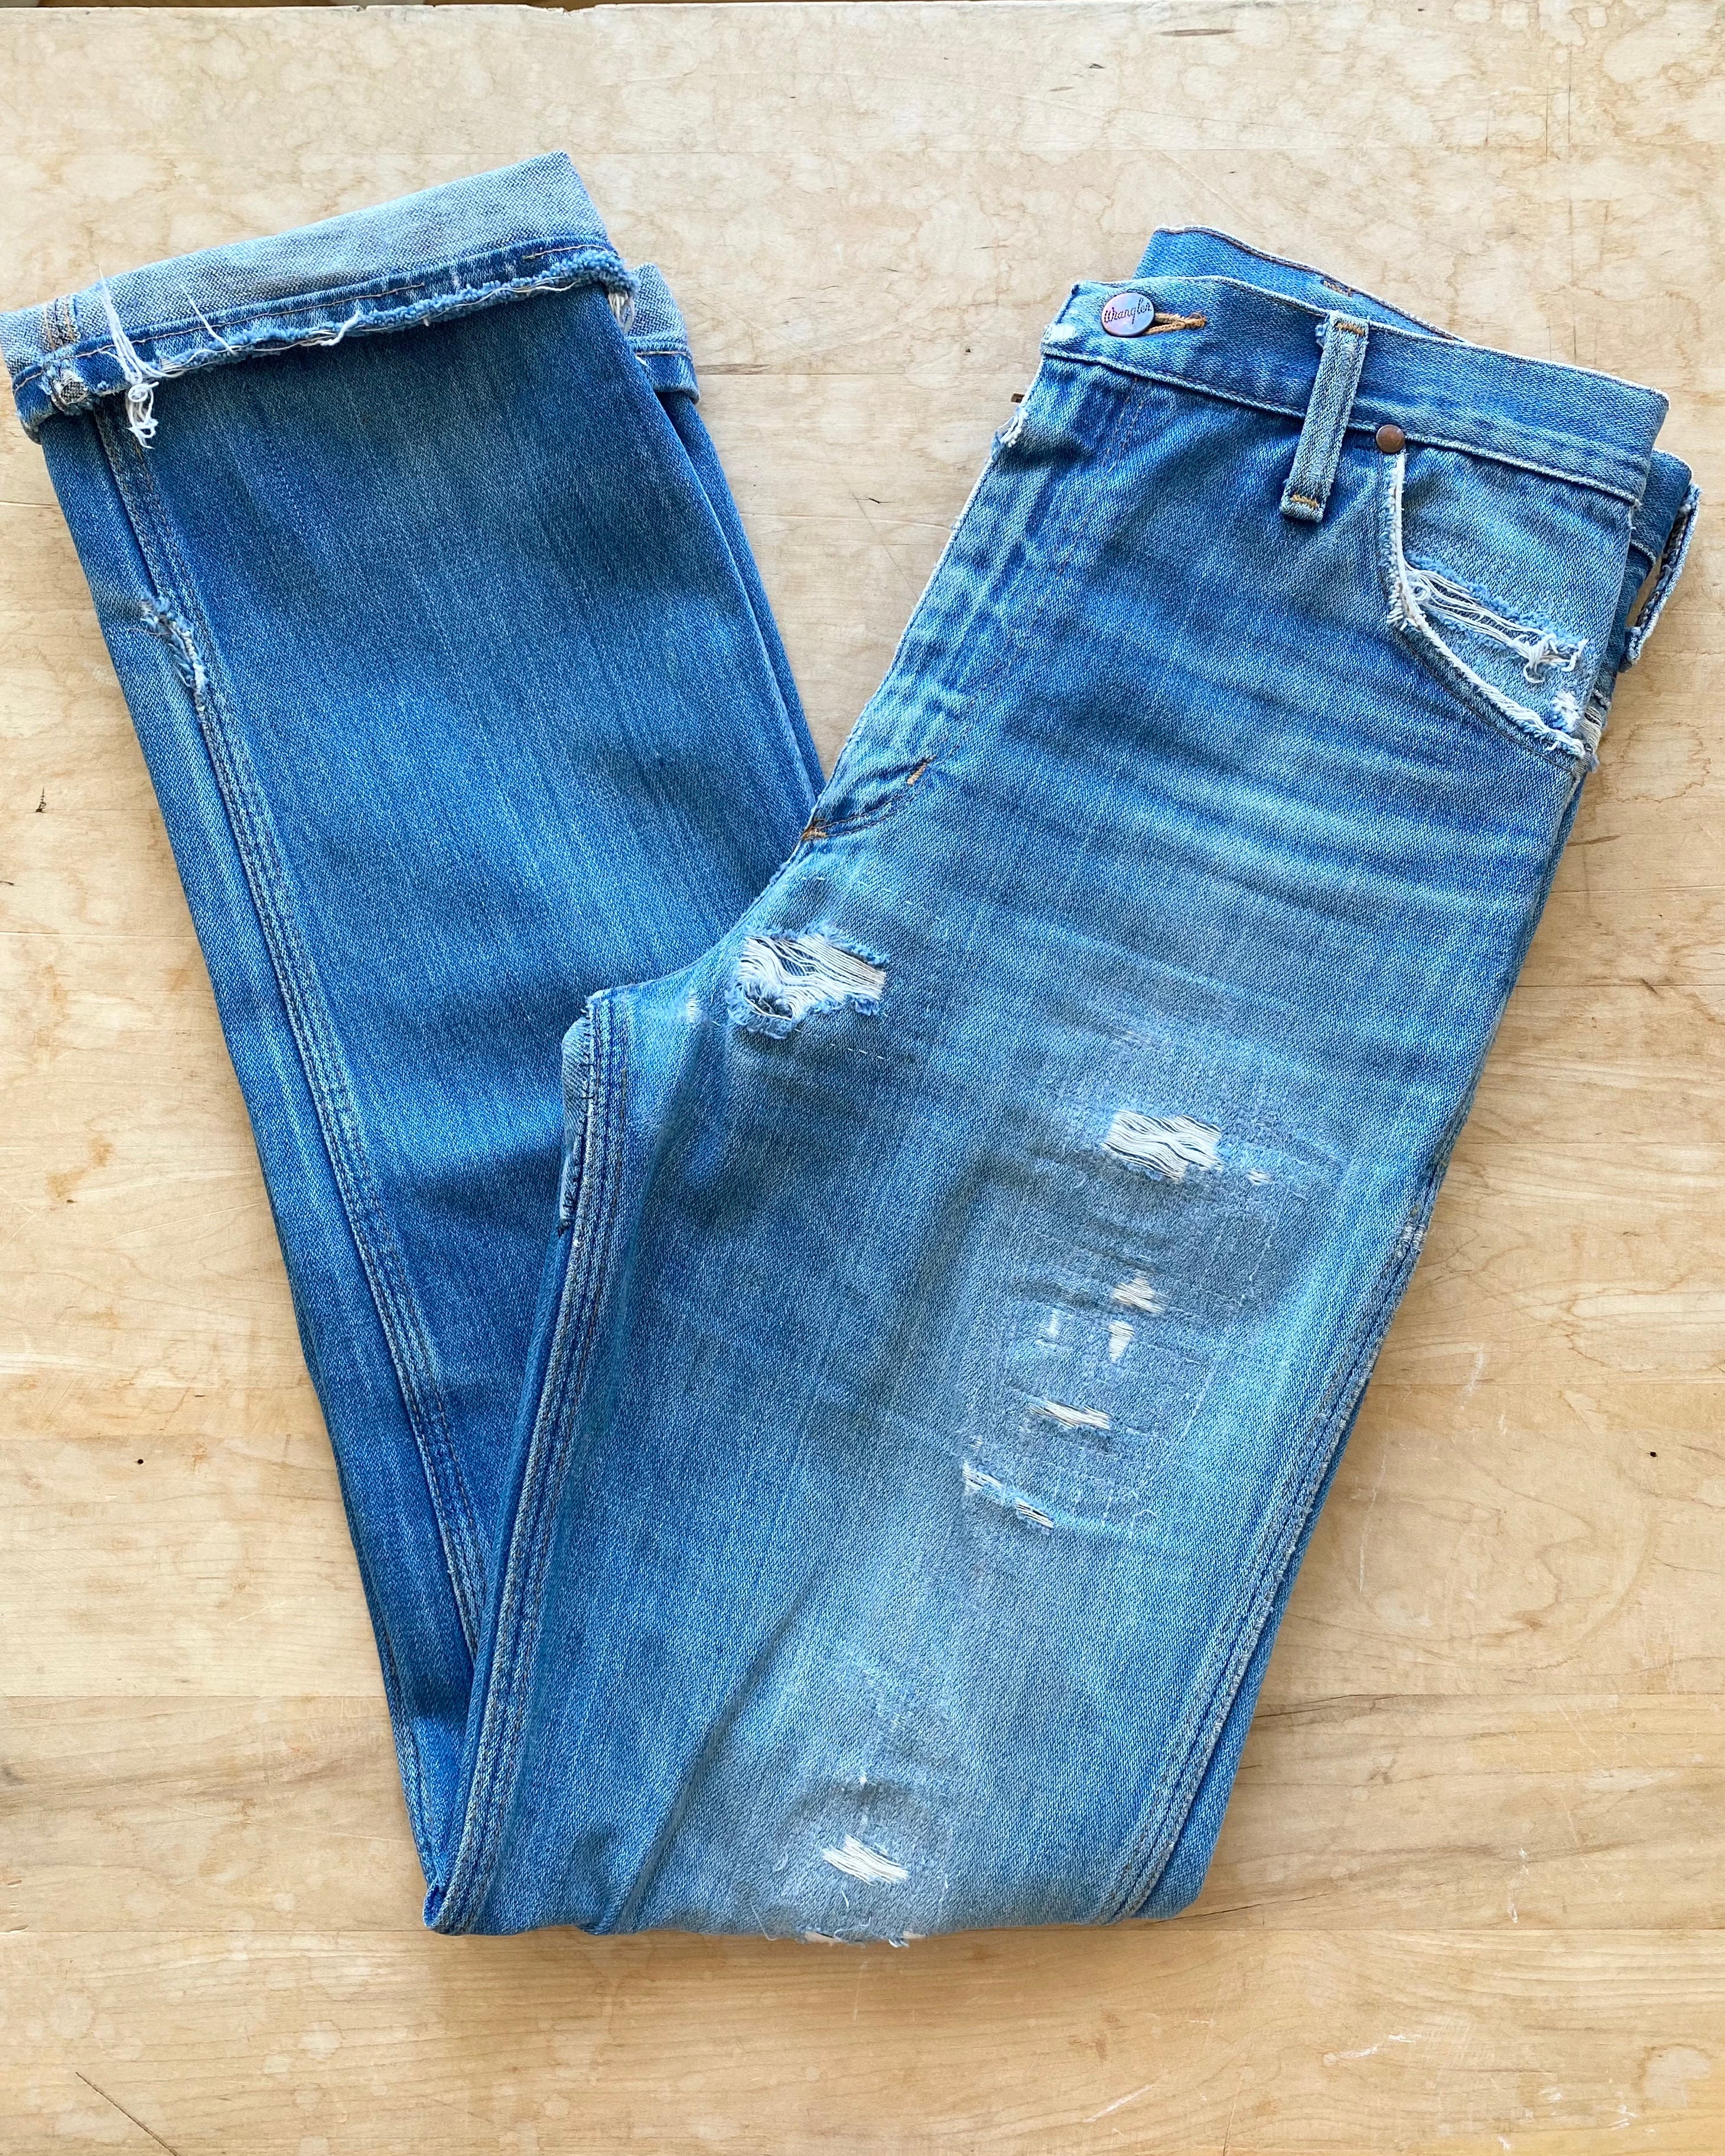 Vintage Wranglers 1970s Super Patched Jeans size 29